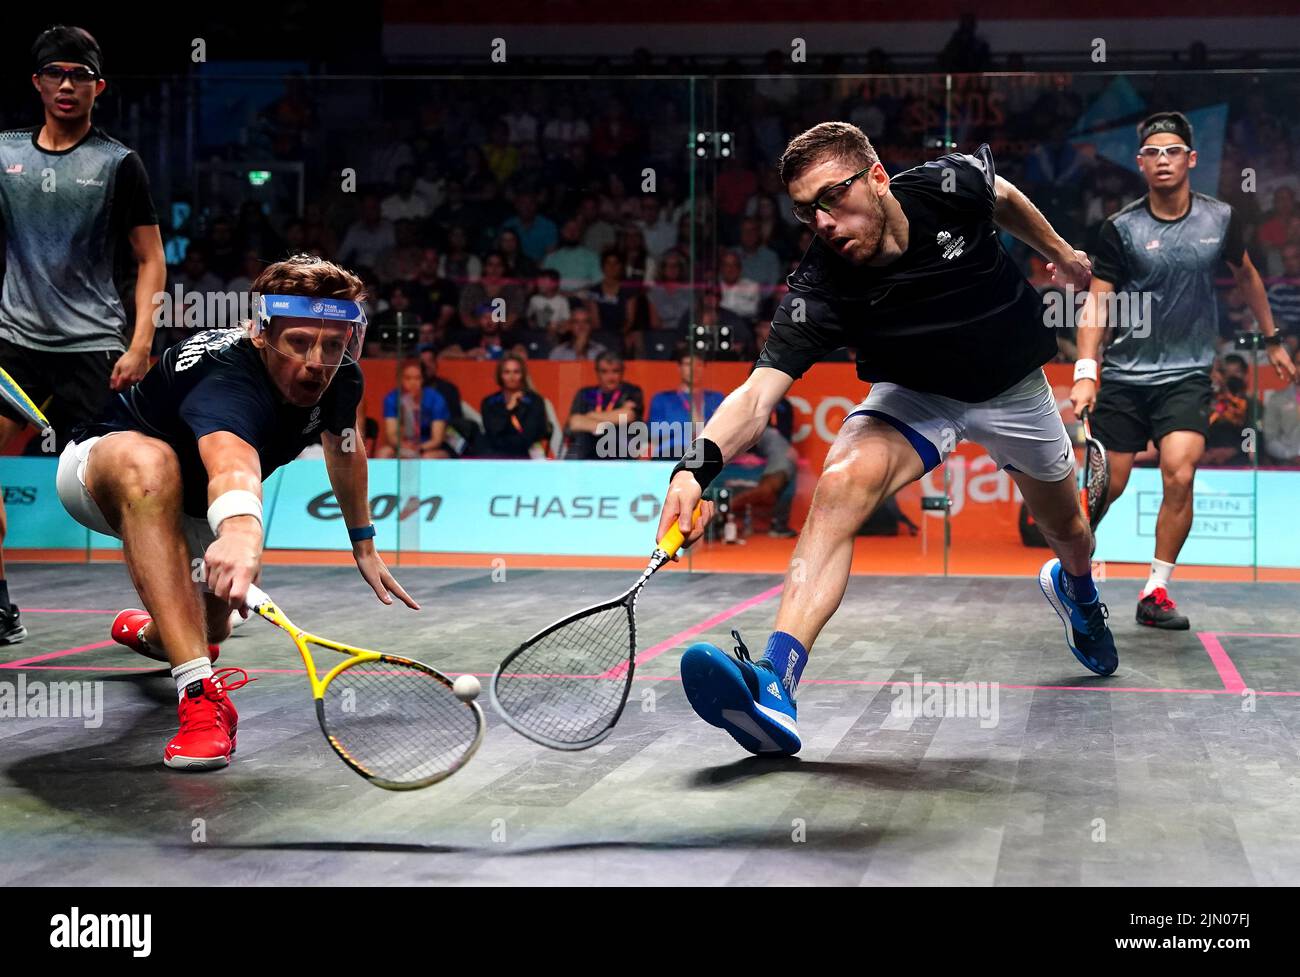 Scotland's Greg Lobban (second left) and Rory Stewart during the Men's Squash Doubles Bronze Medal Match against Malaysia's Yow Eain and Chee Wern Yuen at the University of Birmingham Hockey and Squash Centre on day eleven of the 2022 Commonwealth Games in Birmingham. Picture date: Monday August 8, 2022. Stock Photo